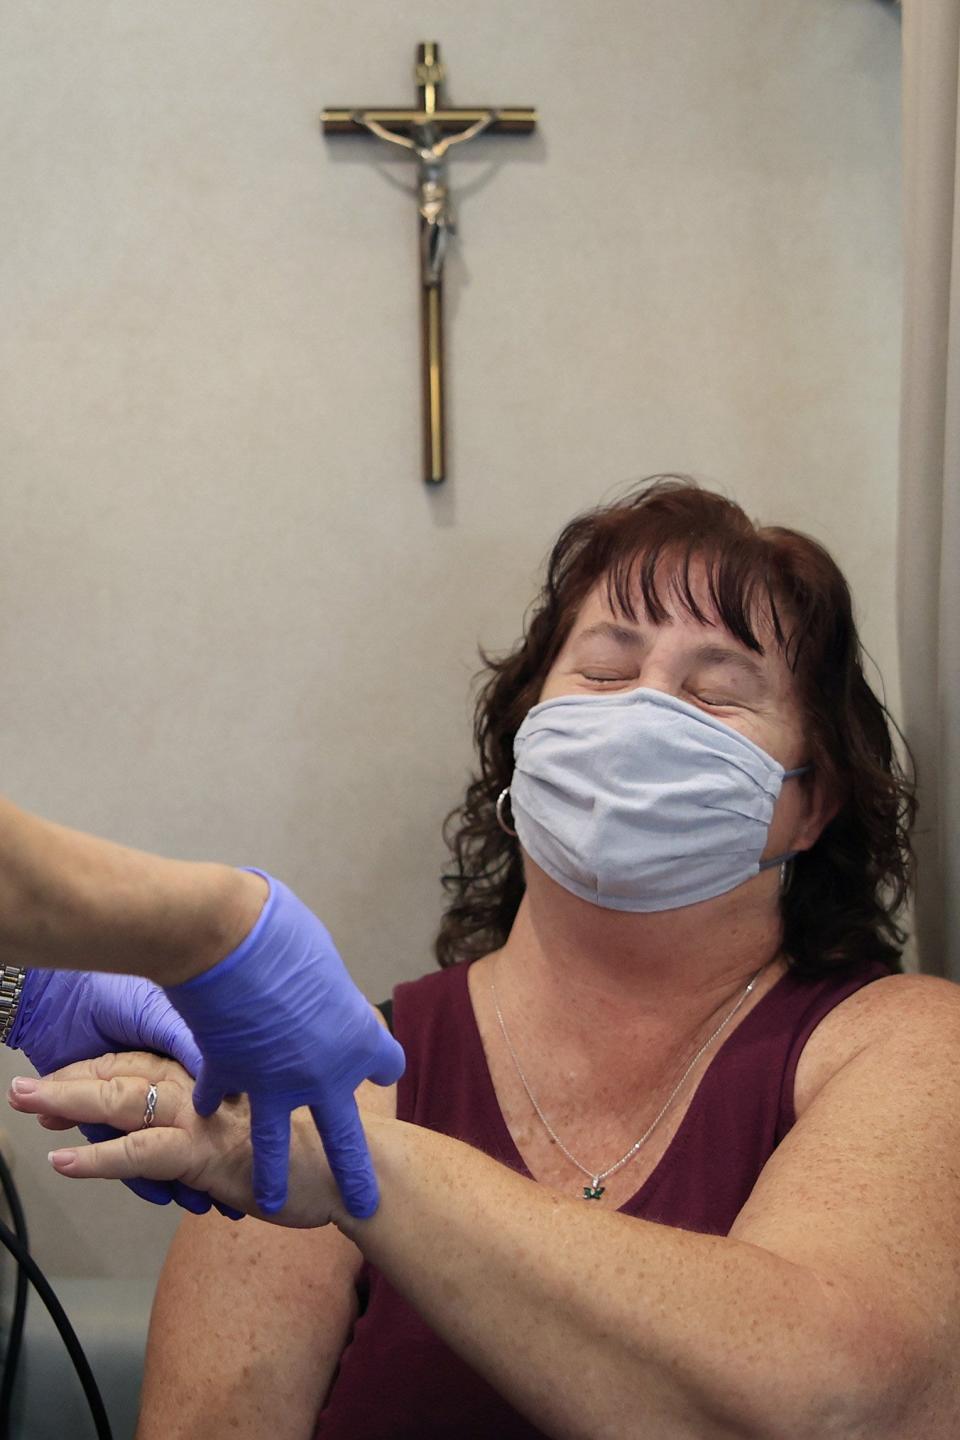 Victoria Nelson steels herself for a blood sample prick during a checkup inside an Ascension St. Vincent's mobile health care clinic. The five-unit fleet serves the uninsured, underinsured and low-income people in Duval, Clay, Nassau, Putnam and St. Johns counties.